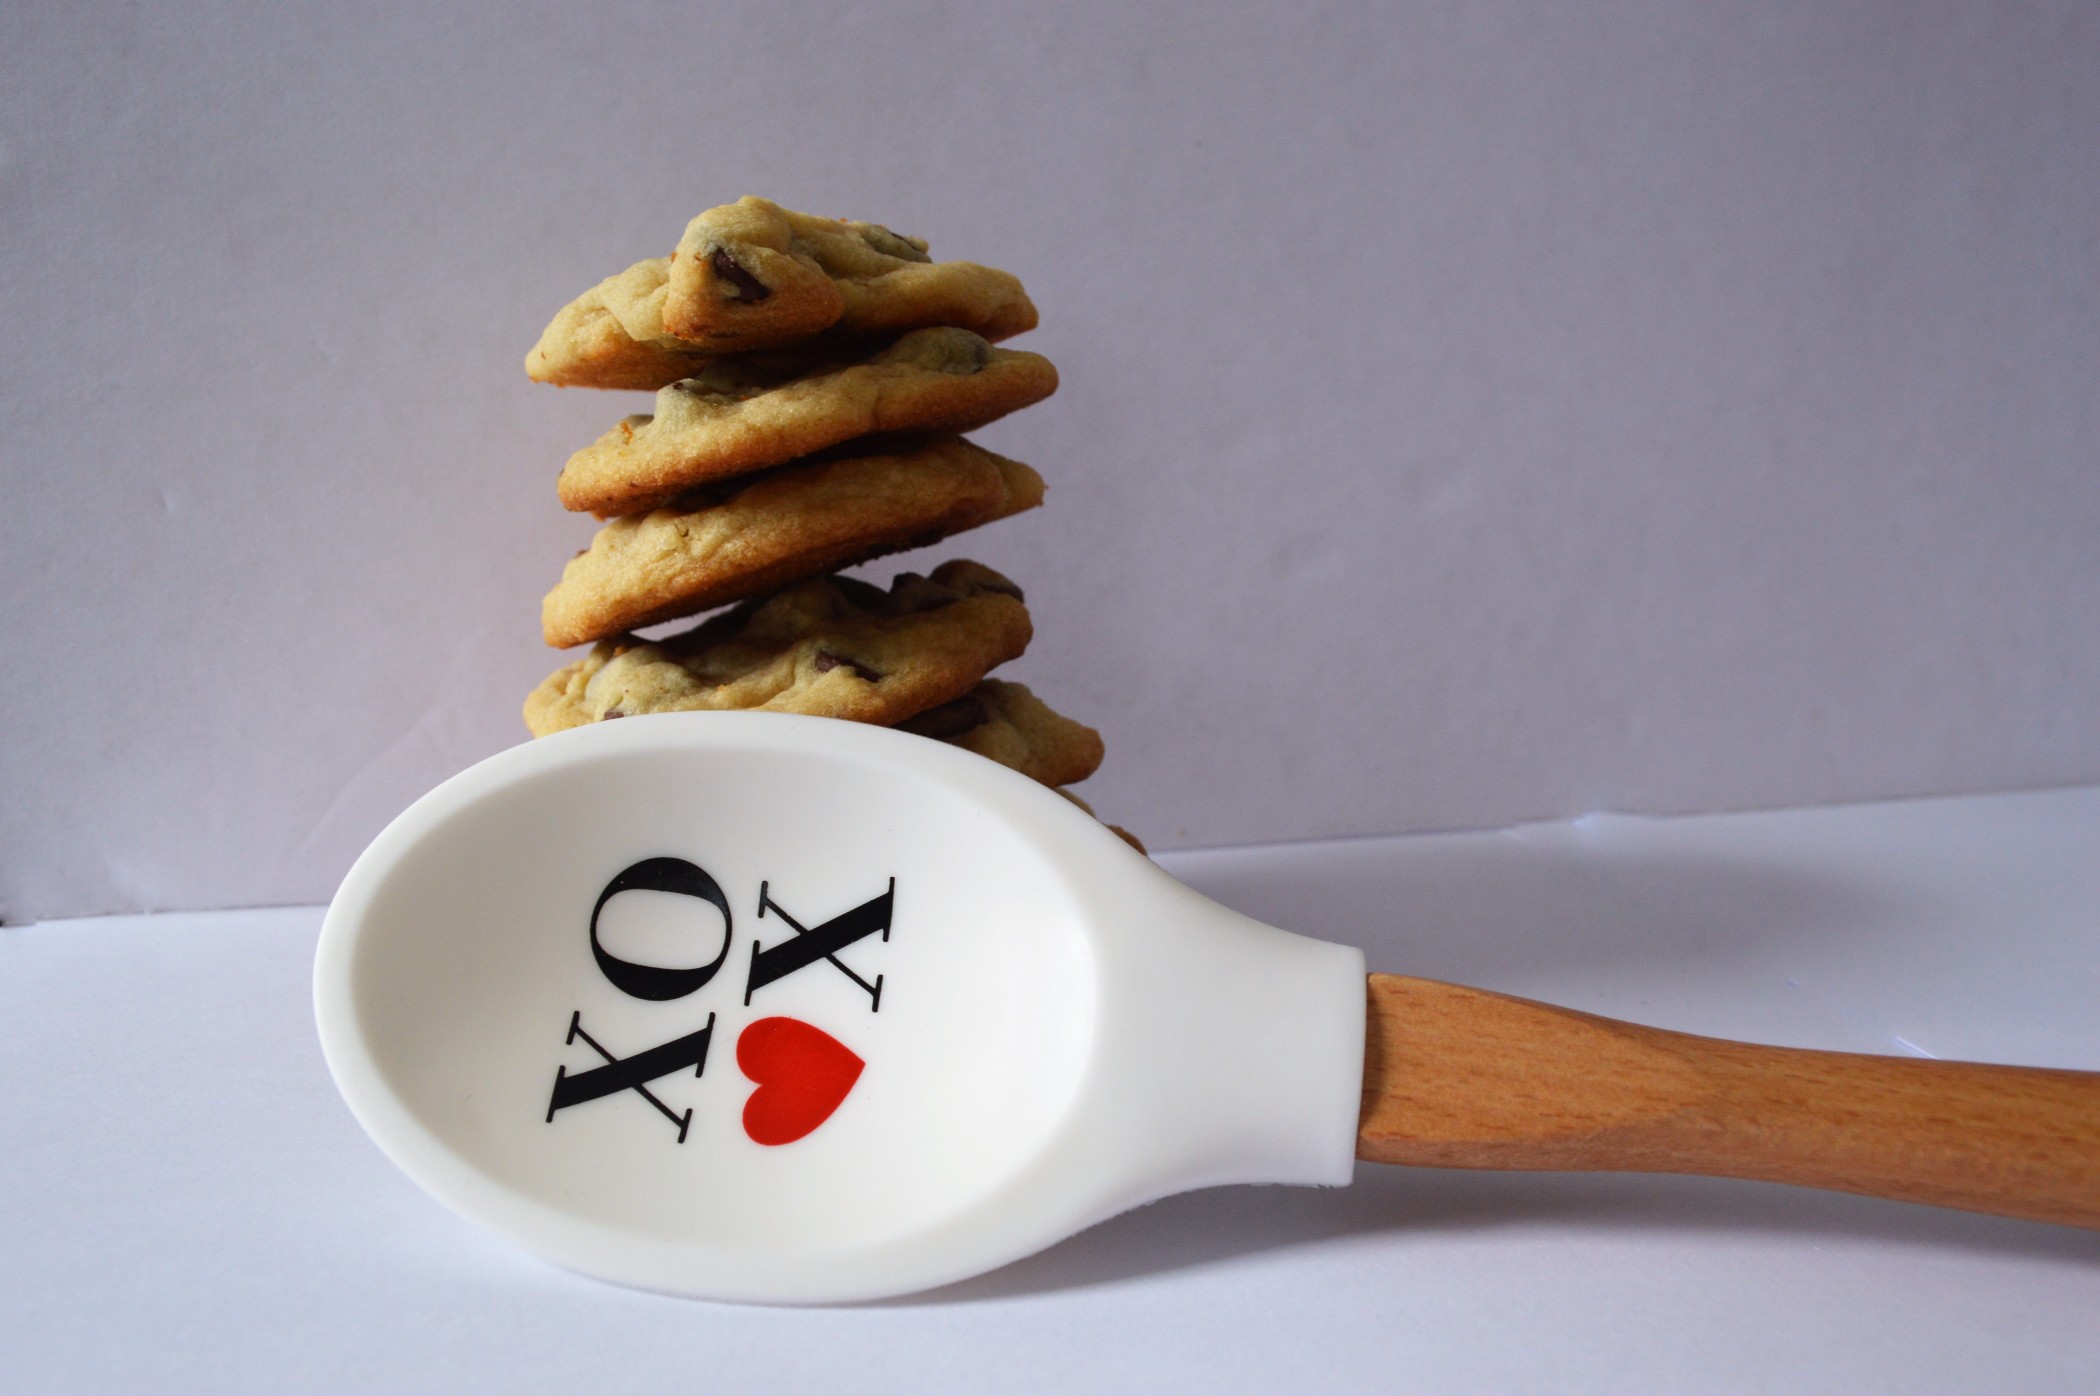 homemade-chocolate-chip-cookies-just-love-them_t20_kROjzR